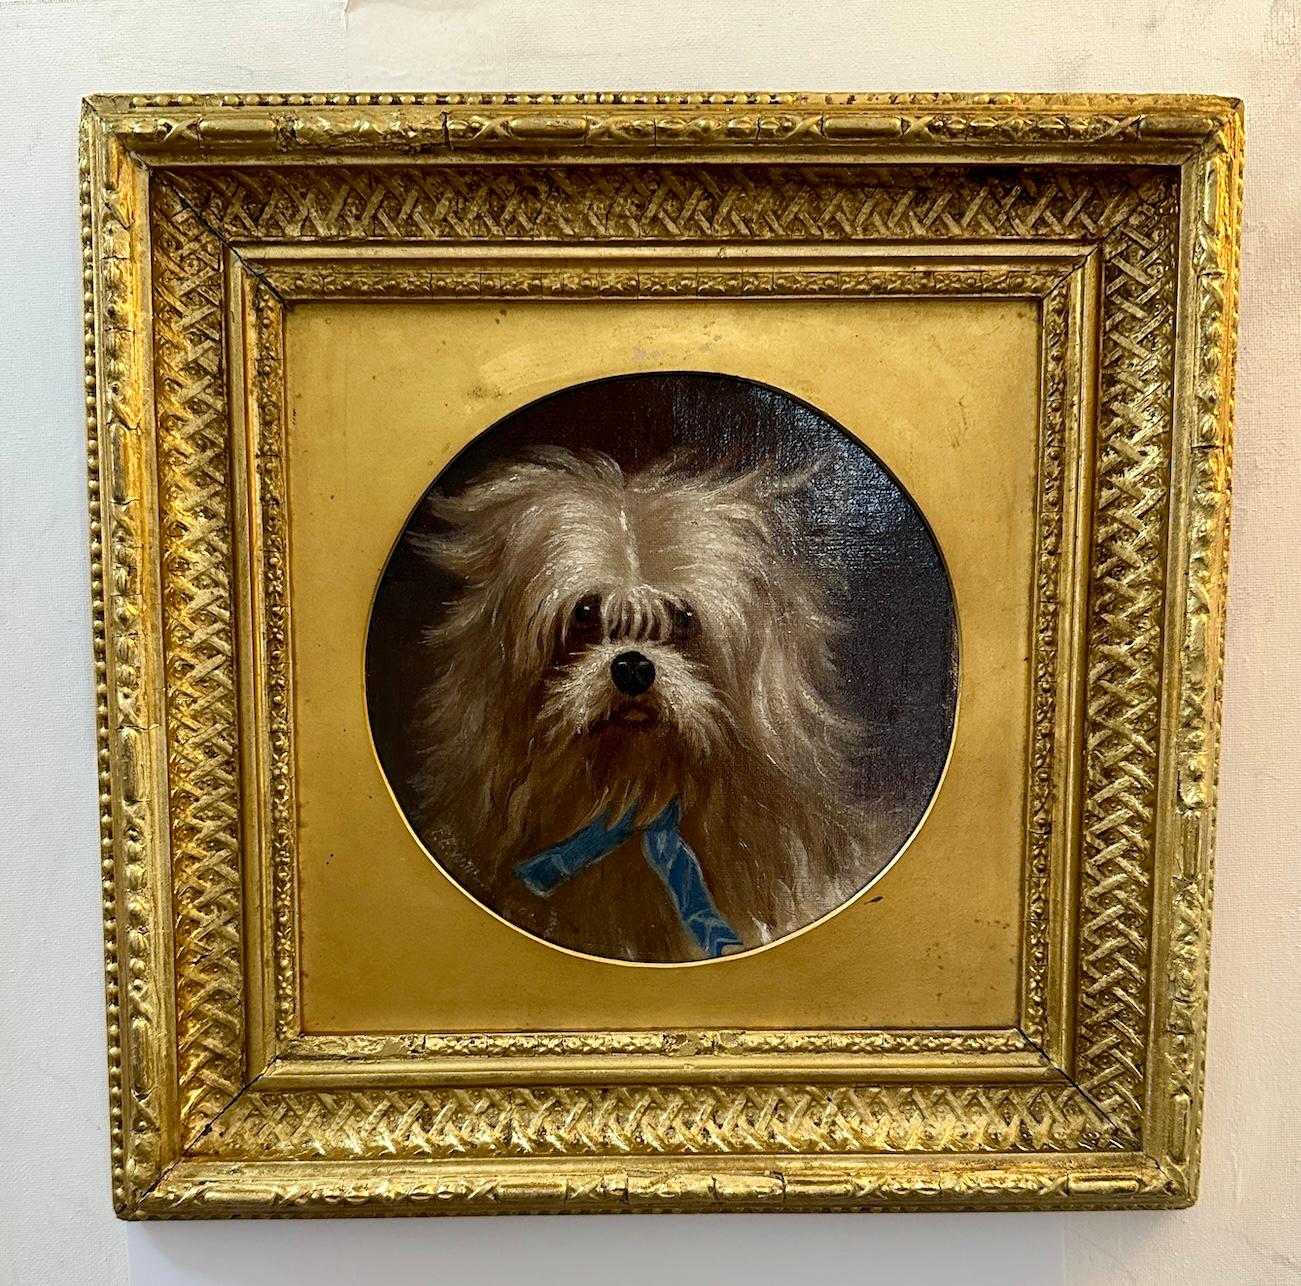 19th century English portrait of a dogs head, a terrier, or Bichon